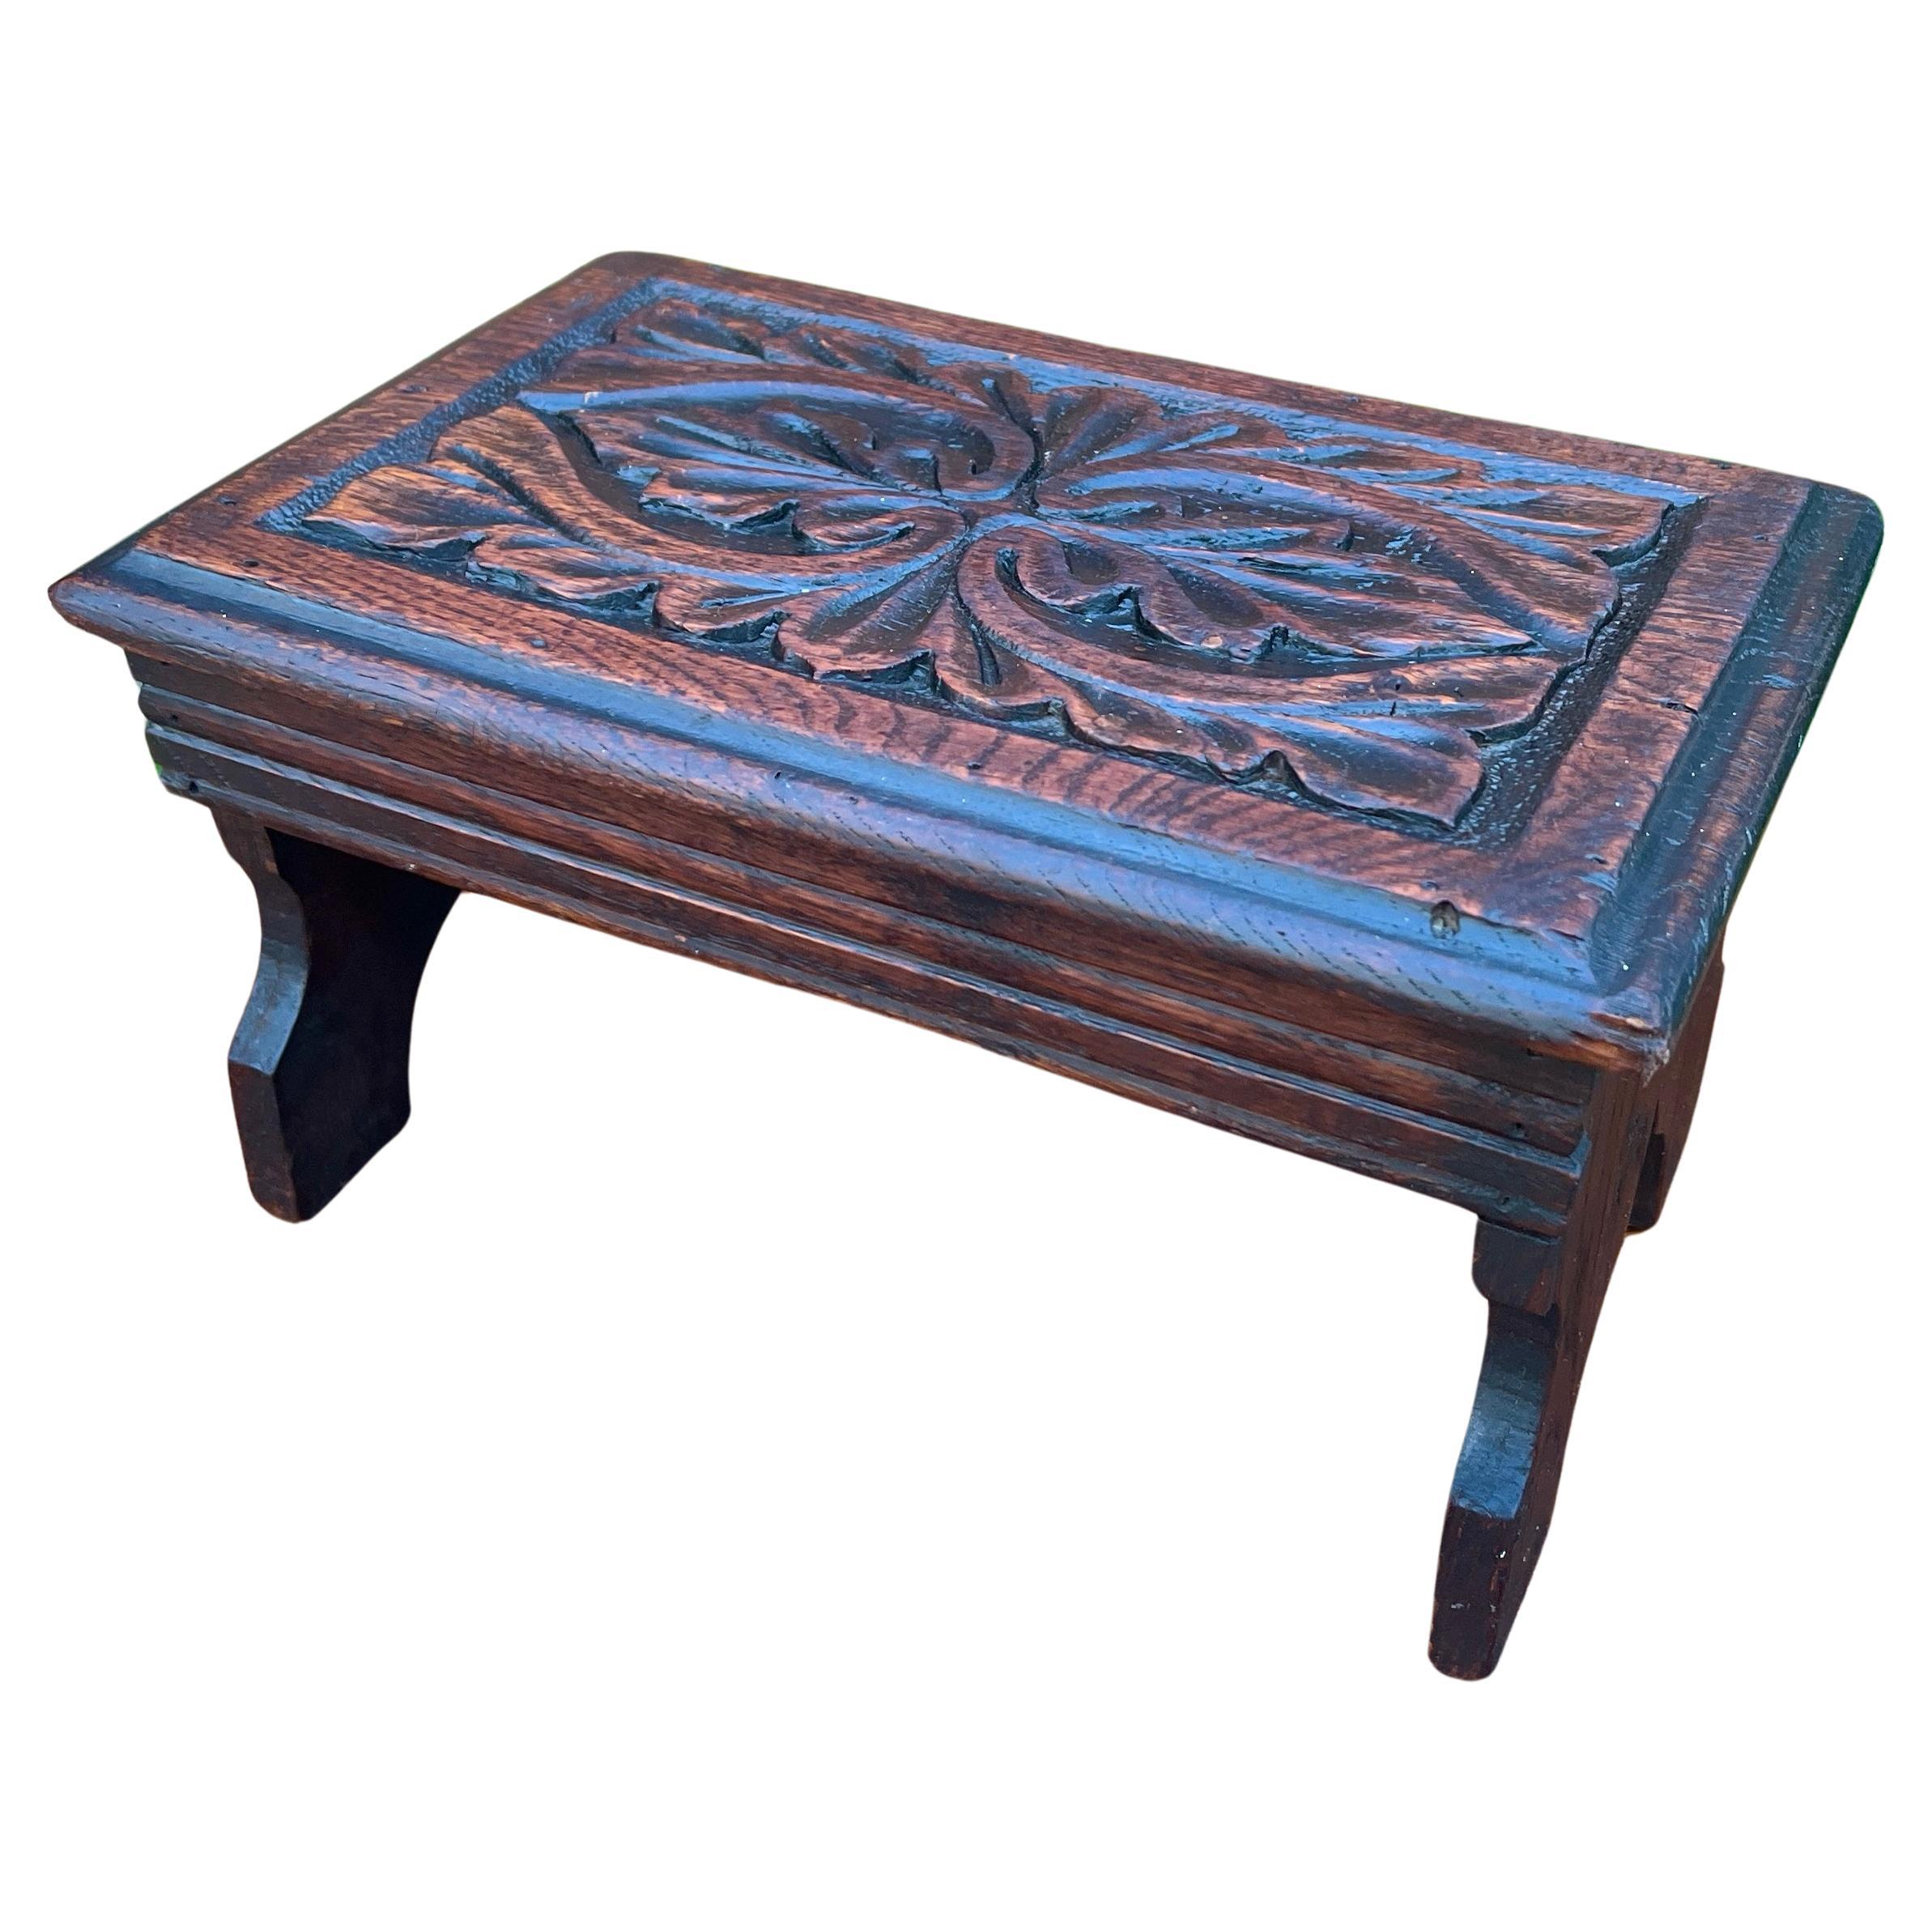 Antique English Kettle Stand Small Footstool Bench Carved Oak c. 1920s-30s For Sale